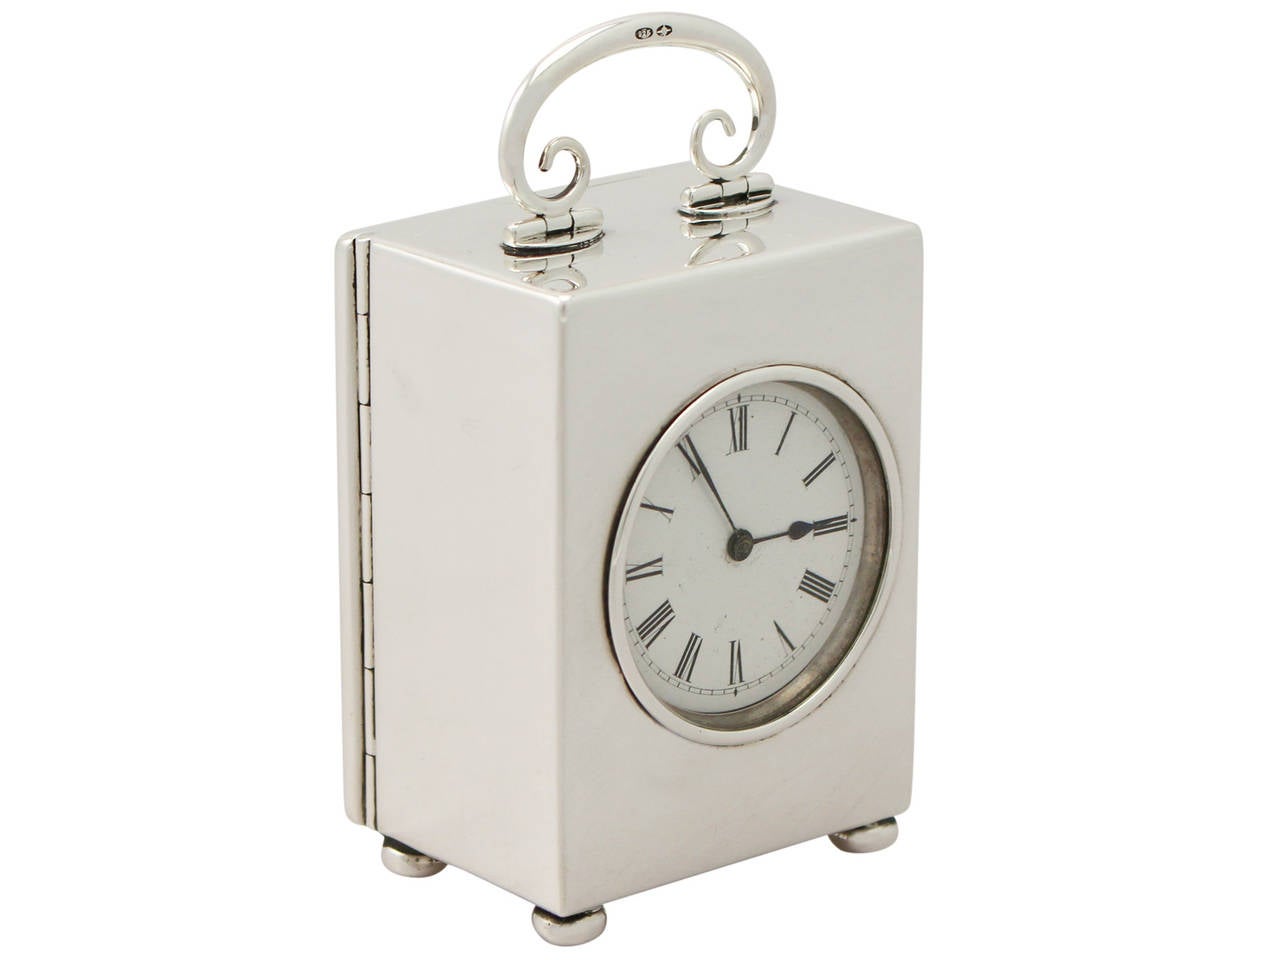 A fine and impressive antique Swiss sterling silver carriage style eight-day boudoir clock; an addition to our silver timepiece collection.

This fine antique sterling silver boudoir clock has a plain rectangular form onto four bun feet.

The